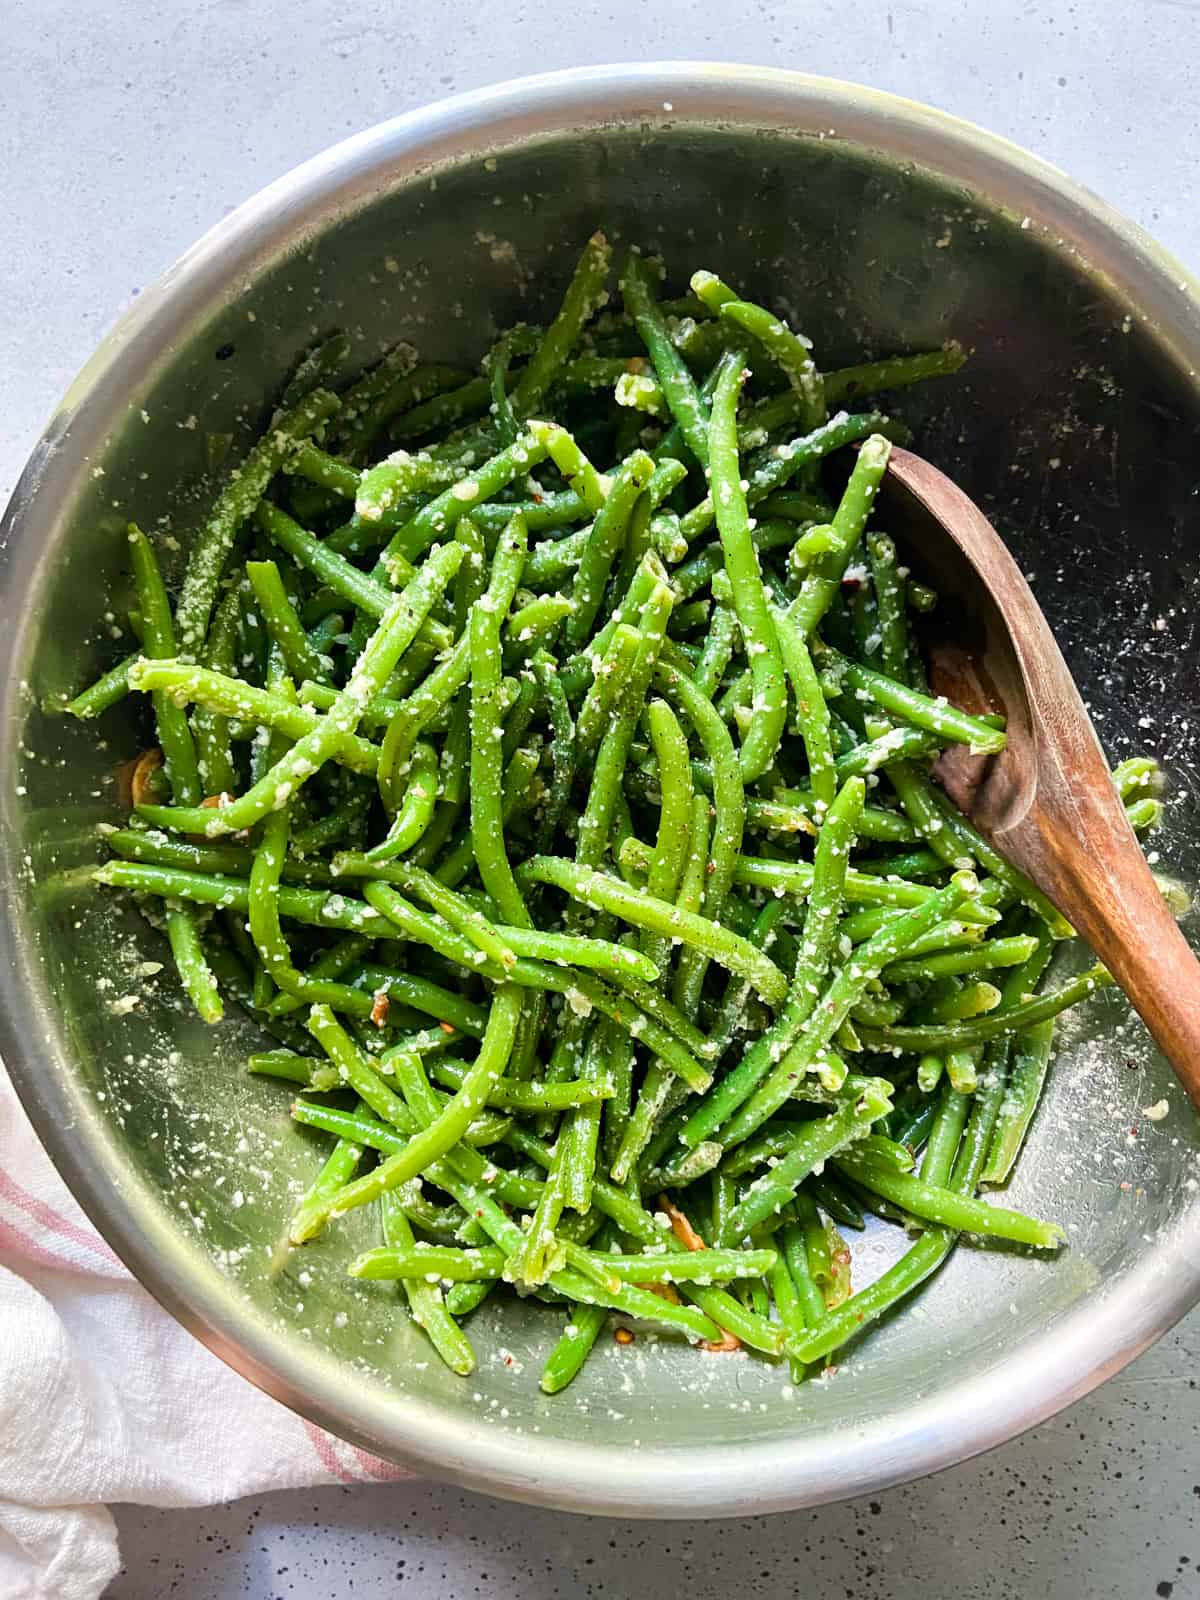 A bowl of green beans tossed with garlic olive oil, crushed red pepper flakes, and parmesan cheese.